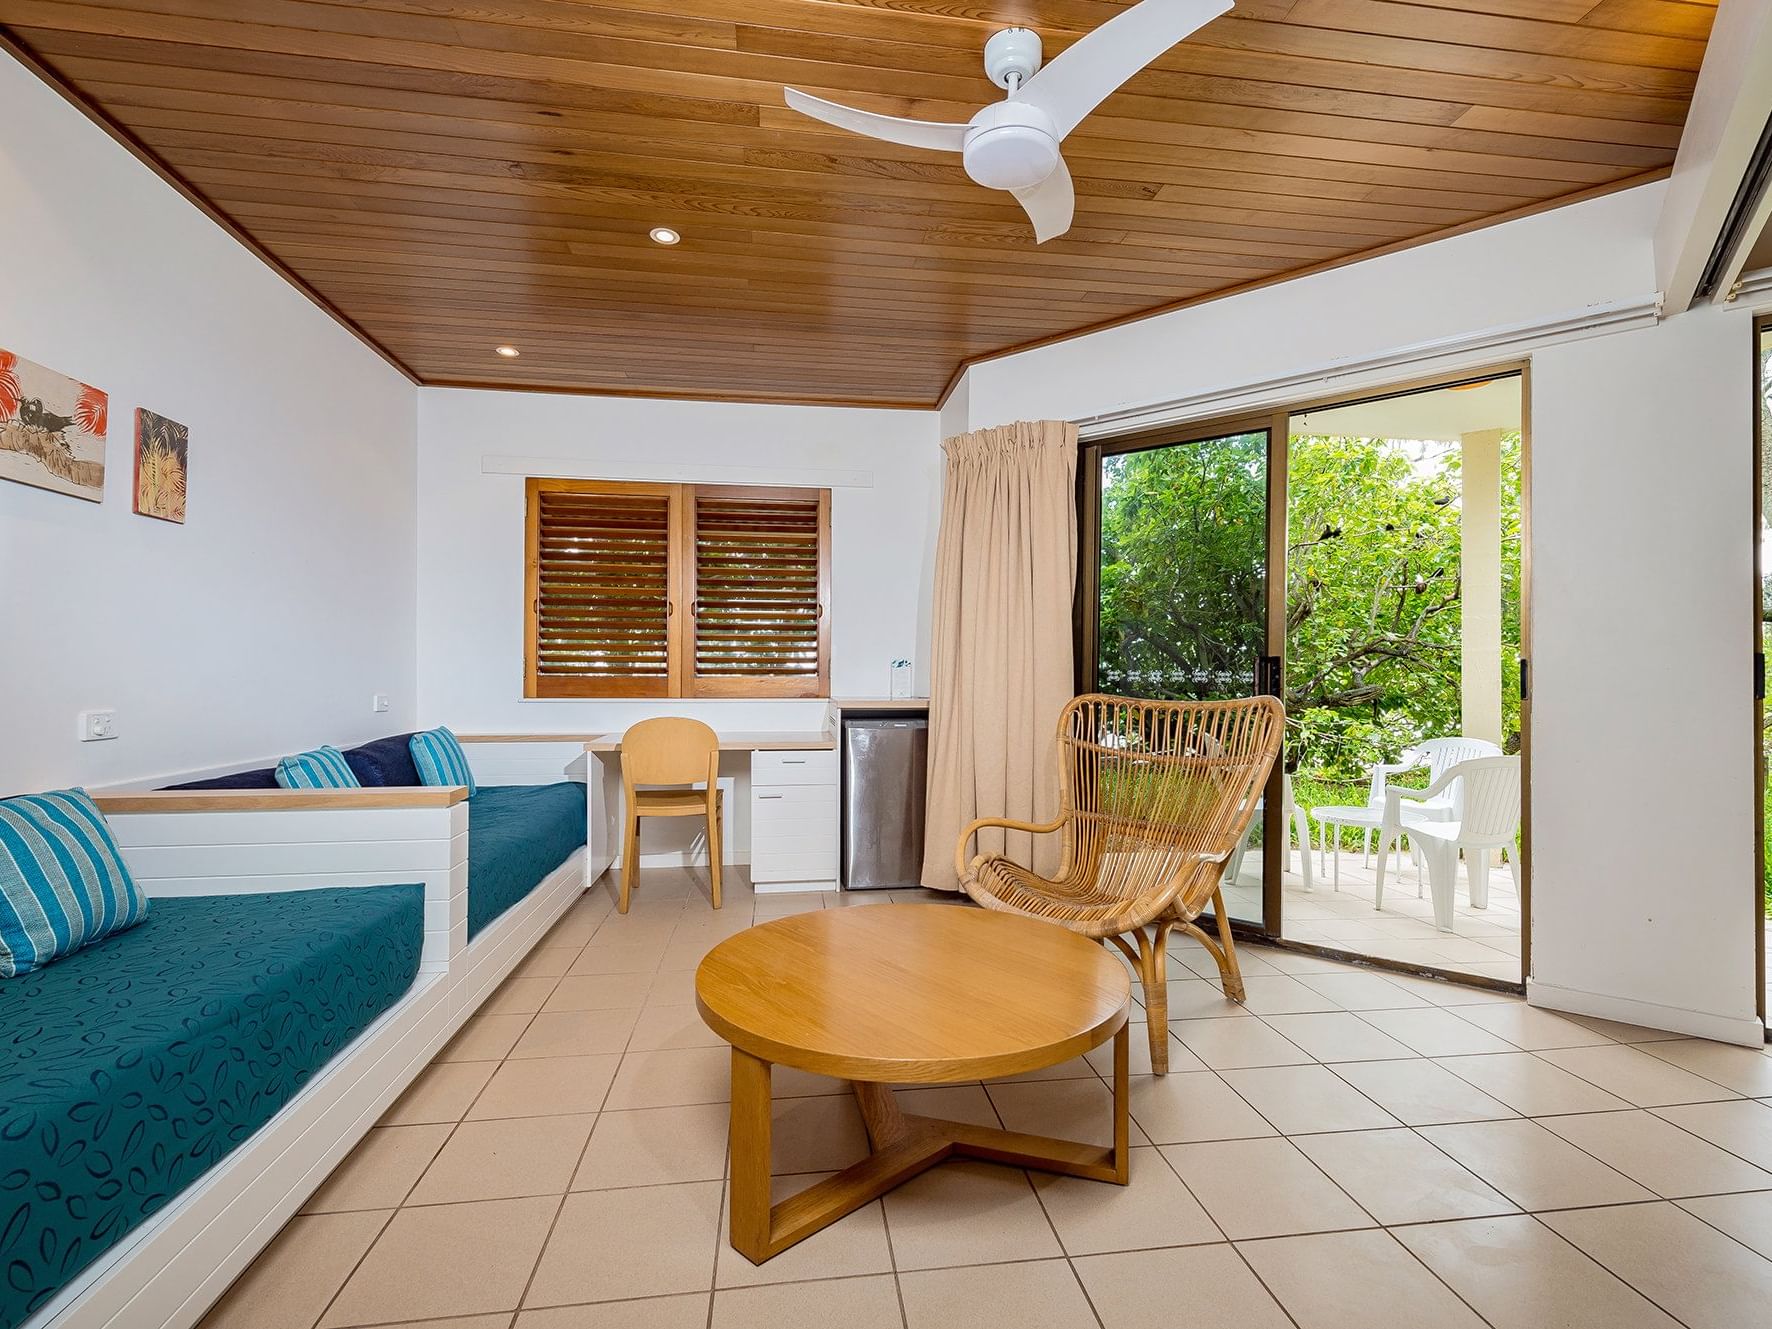 Beachside Room with living space at Heron Island Resort